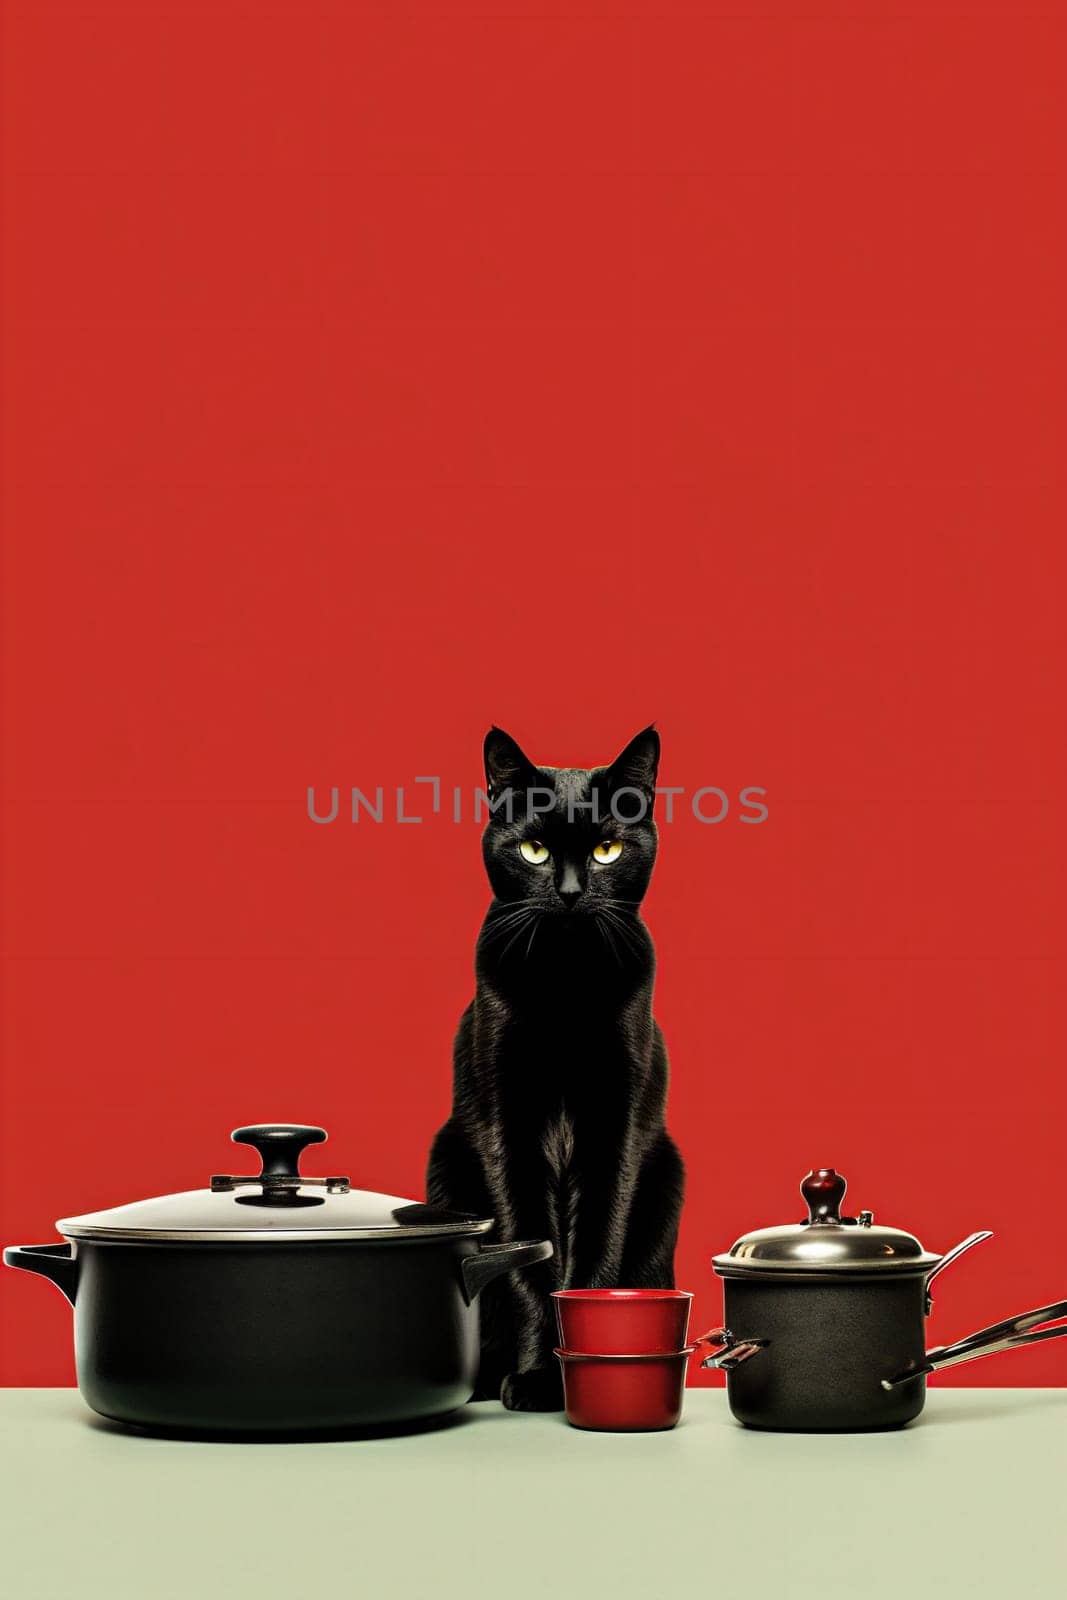 Sleek and elegant black cat sitting on red background with two pots and mug. The cat has calm and confident expression. The image is suitable for advertising, design, or art projects.